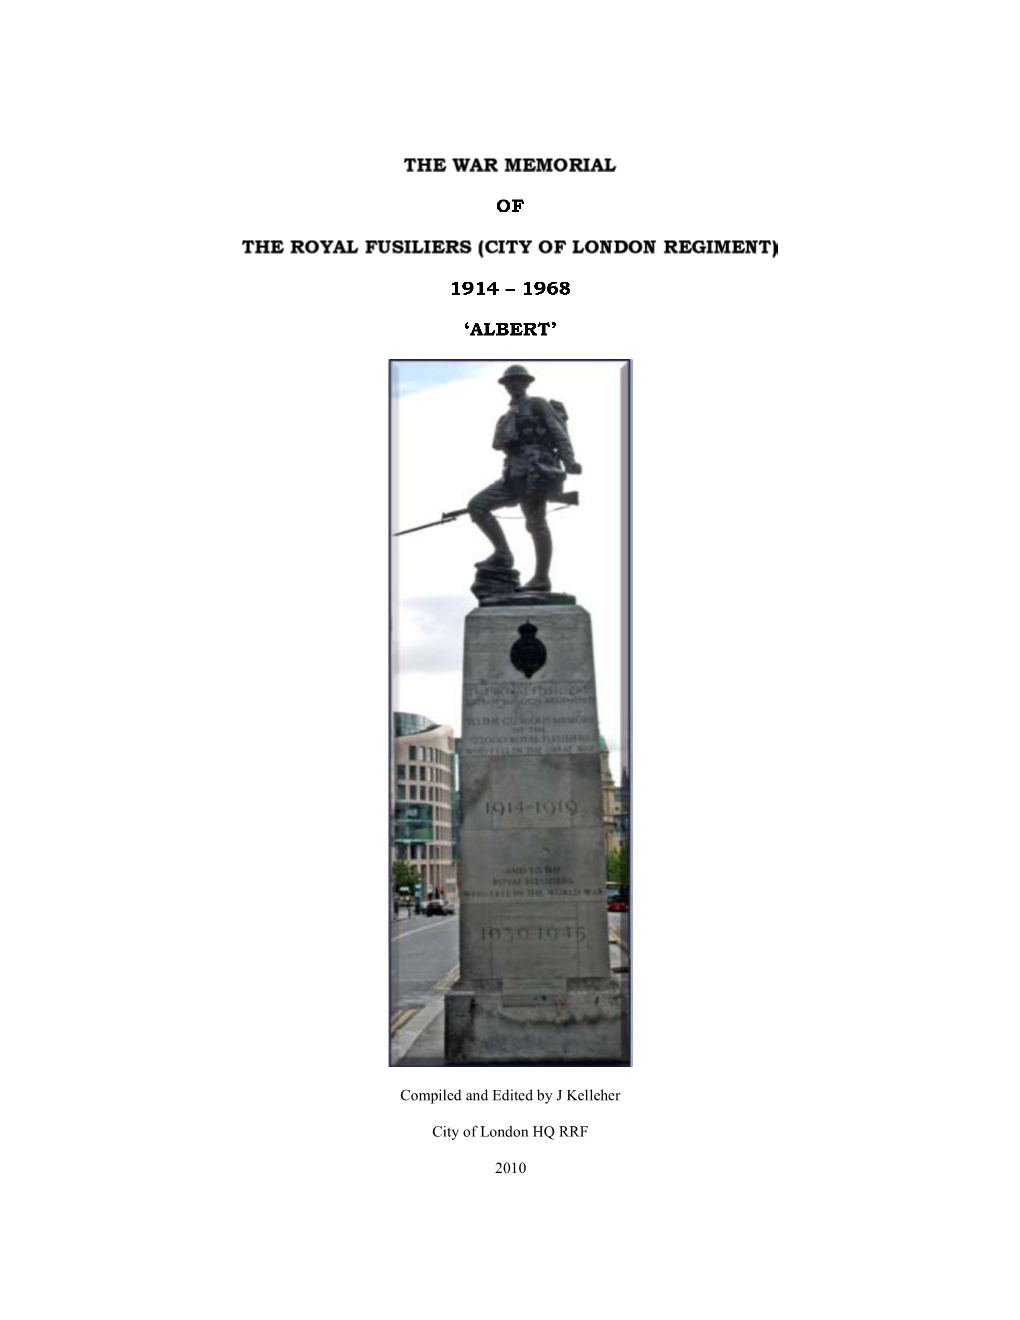 The War Memorial of the Royal Fusiliers